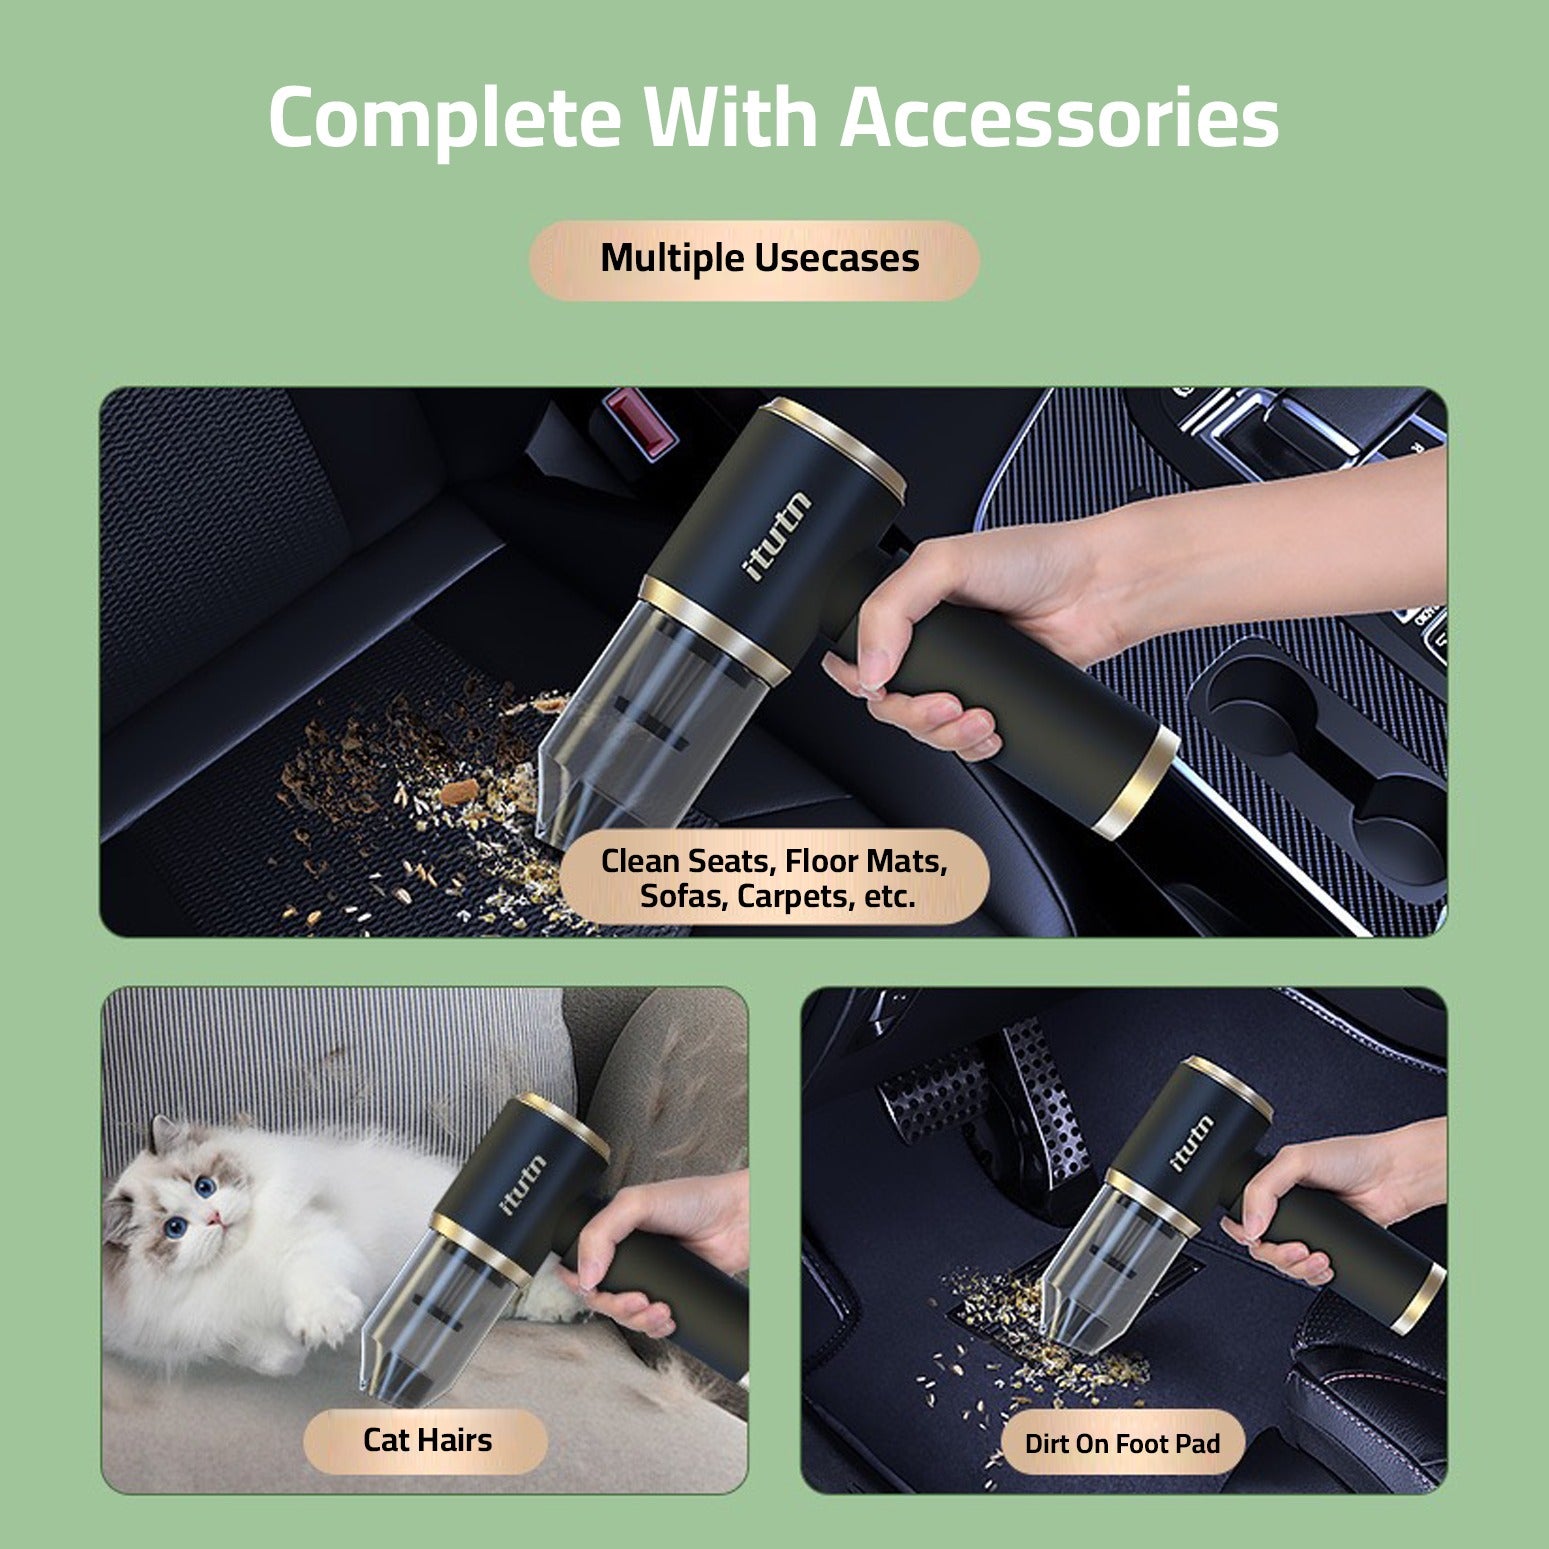 Portable Handheld Wireless Vacuum Cleaner with Suction and Blowing, Multipurpose Dual Vacuum Cleaner